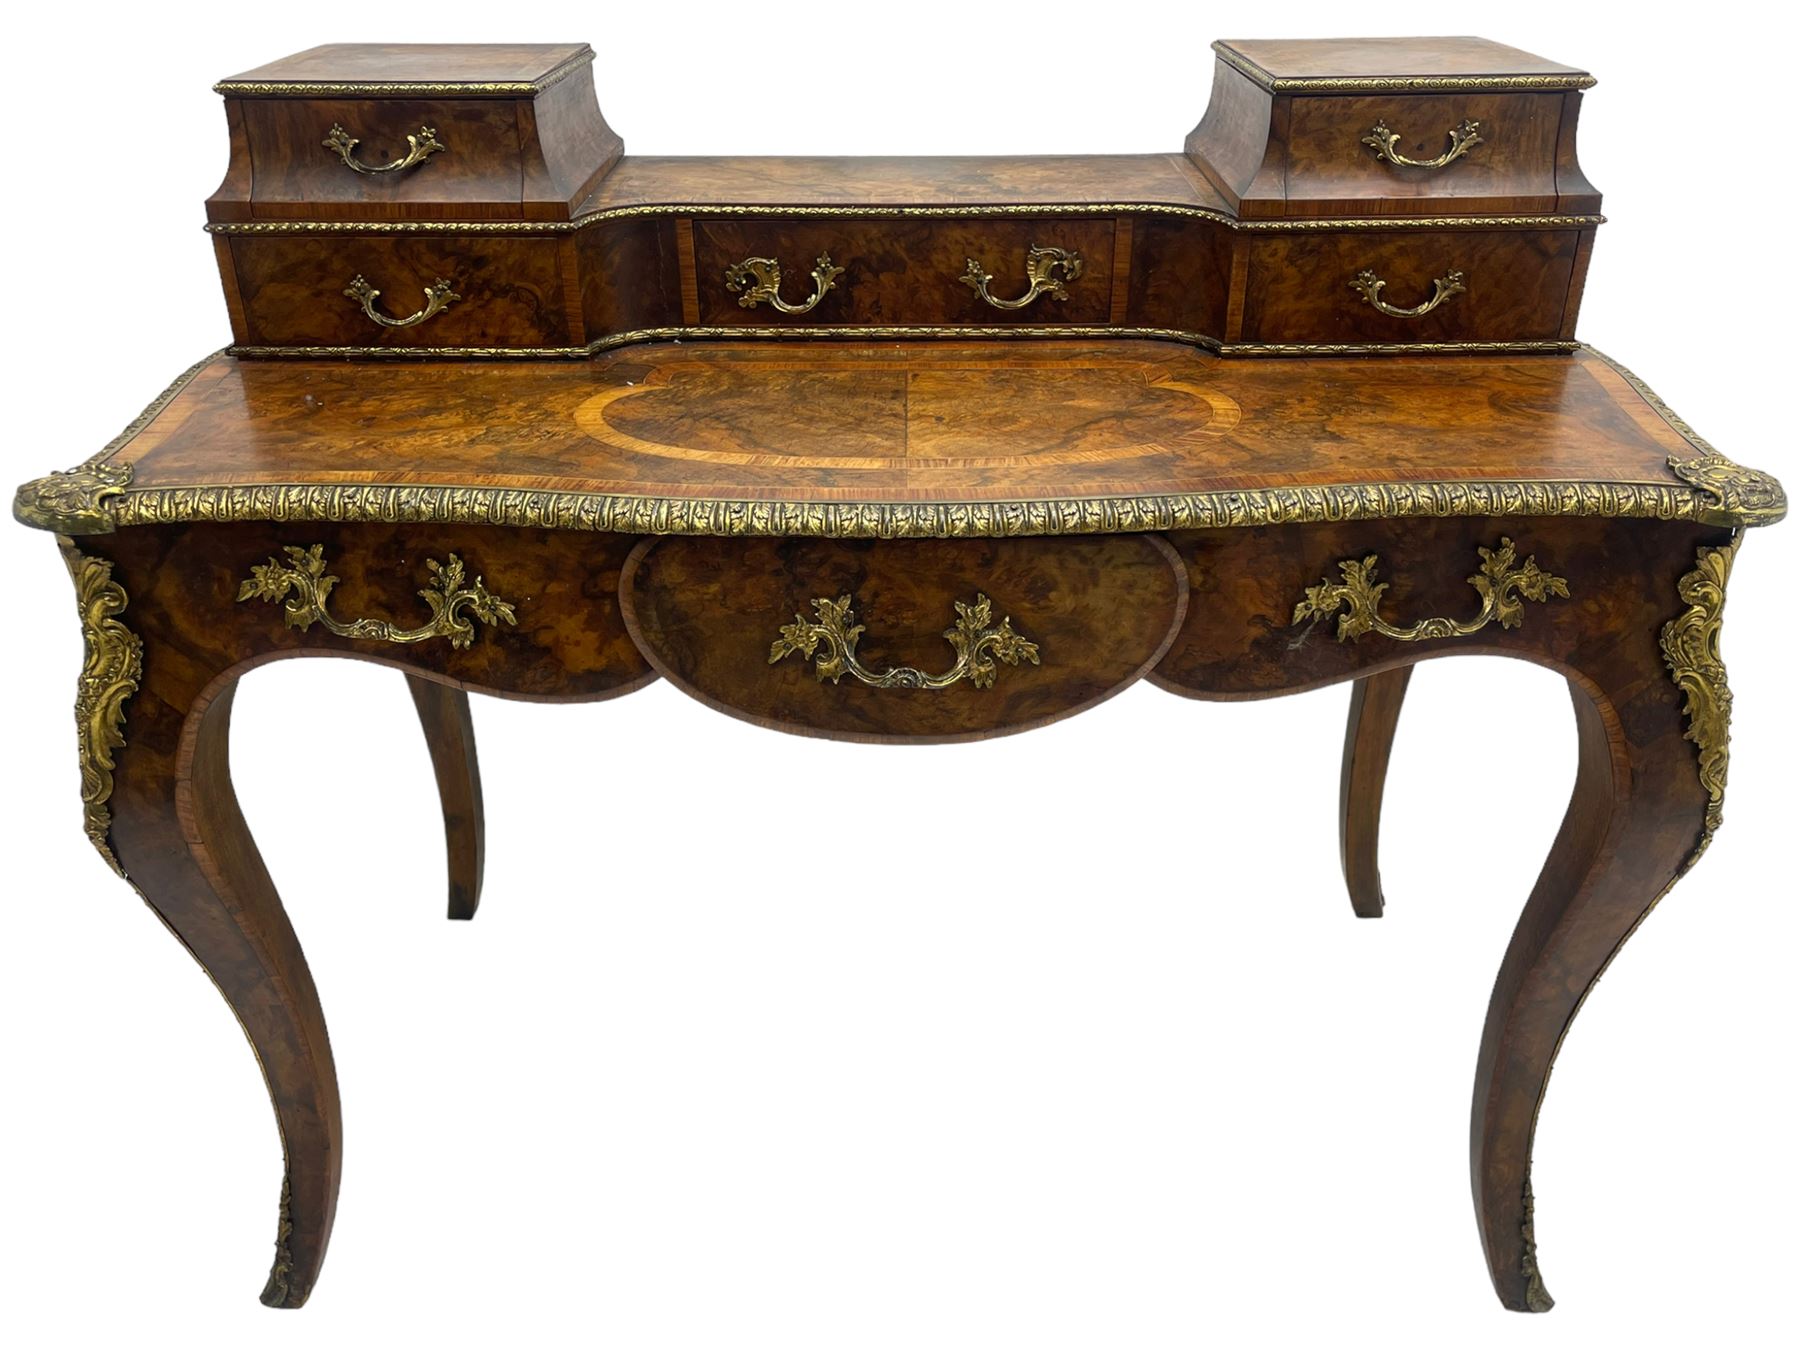 Late 19th to early 20th century French figured walnut writing desk - Image 5 of 13